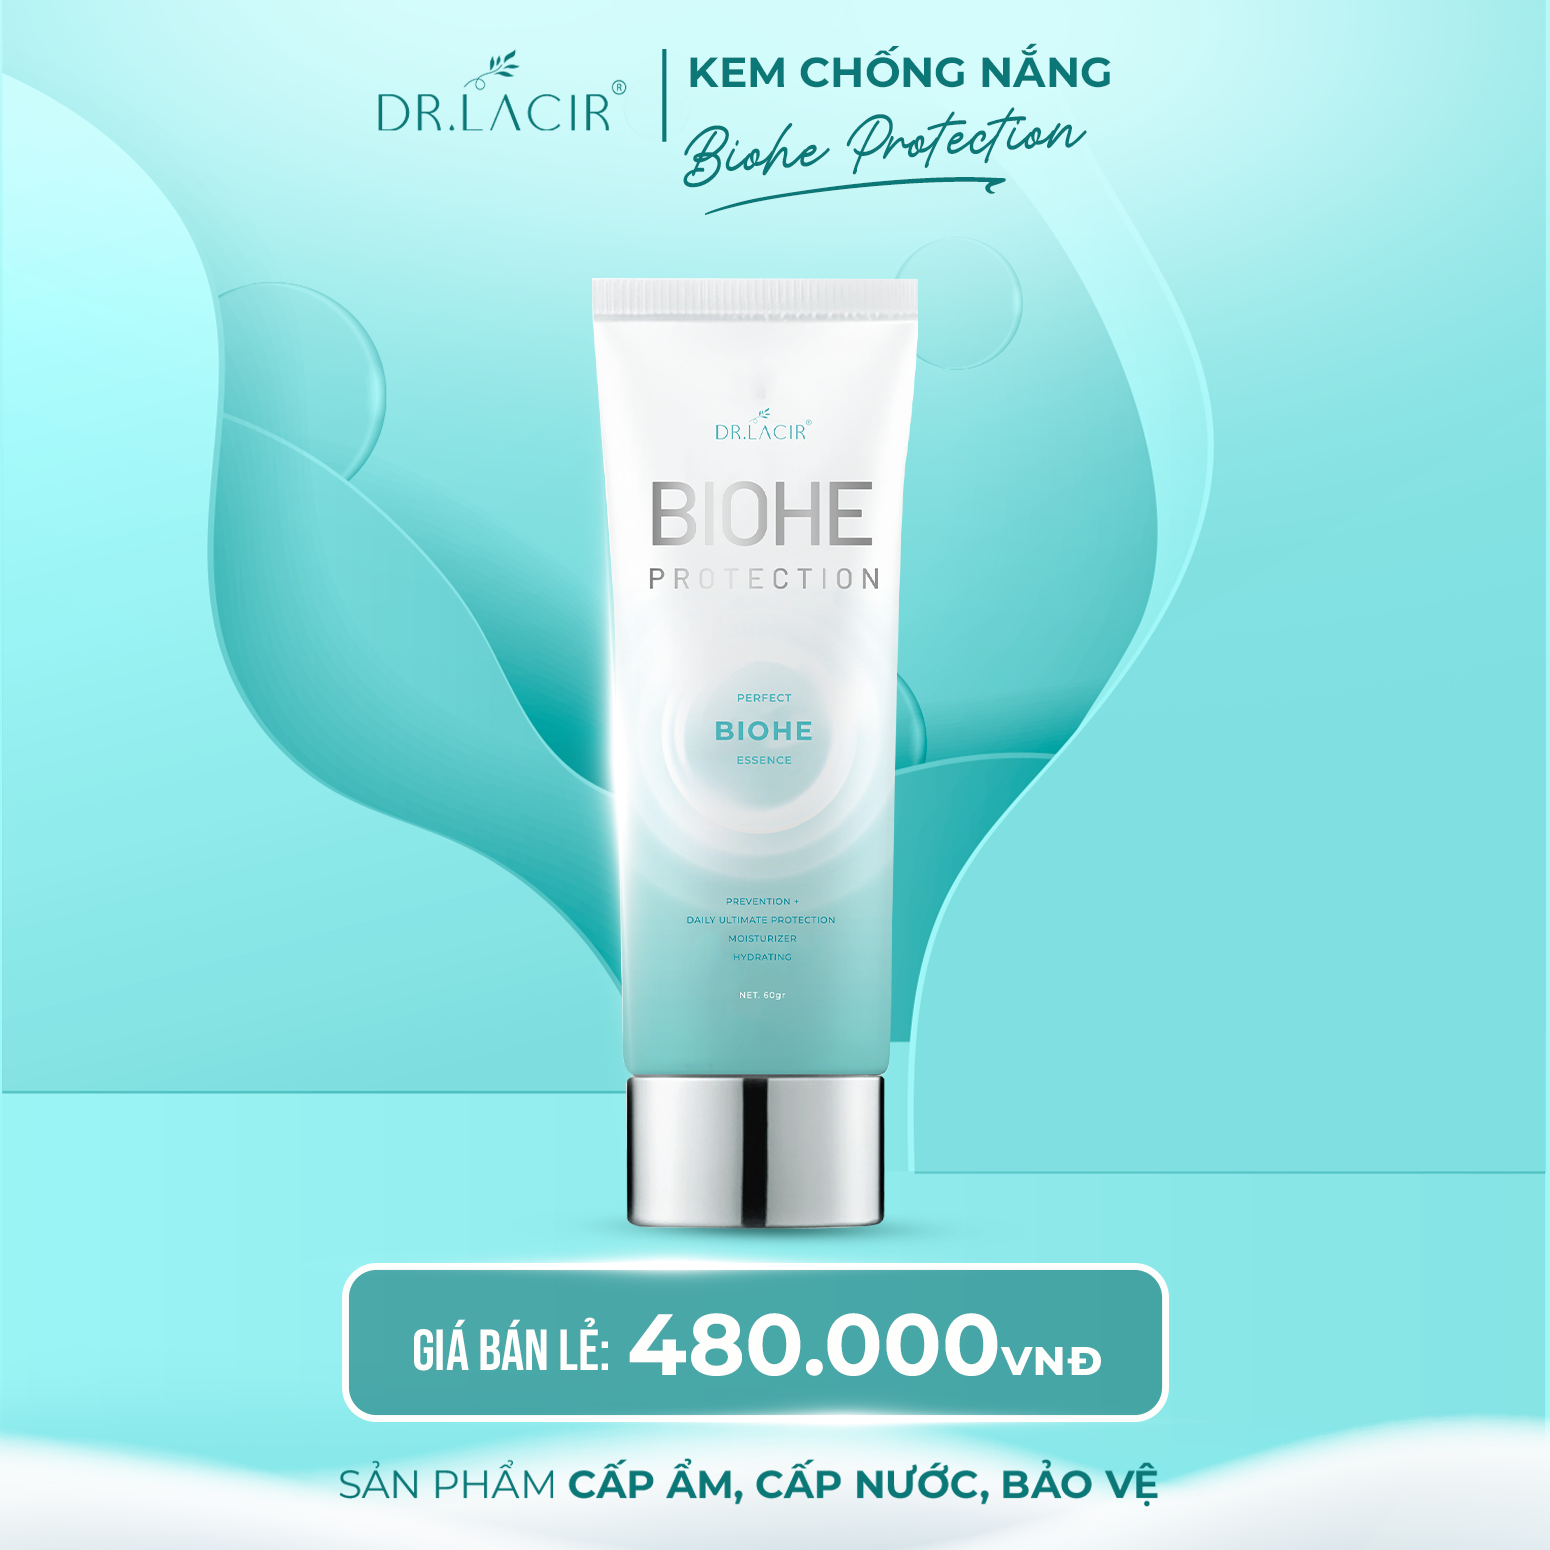 Chống Nắng Sinh Học Biohe Protection Dr.Lacir